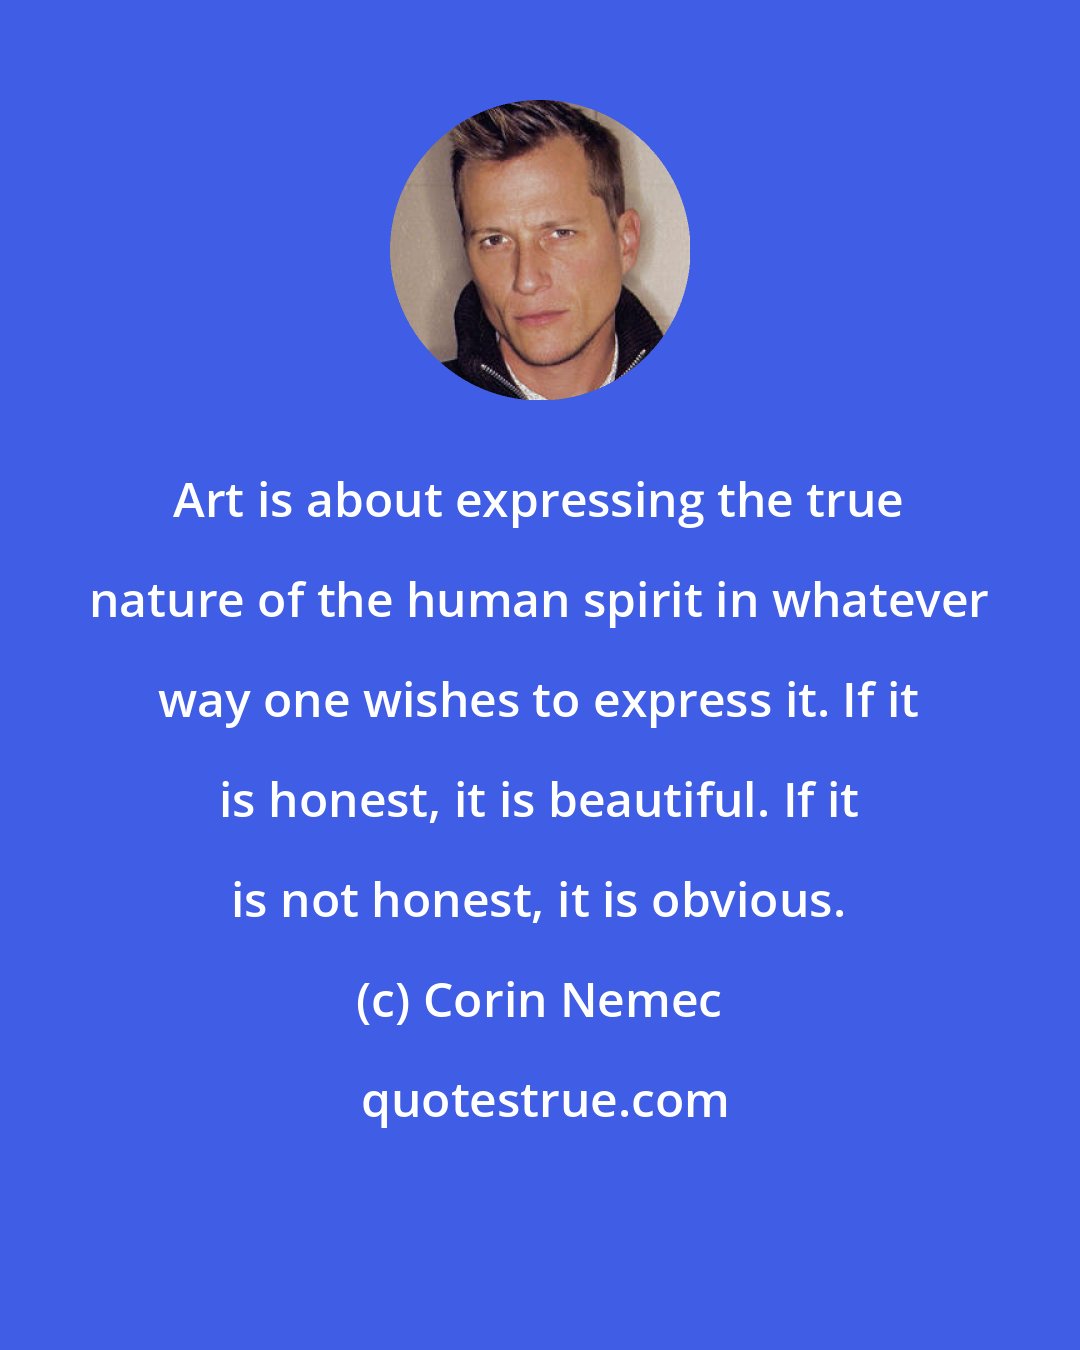 Corin Nemec: Art is about expressing the true nature of the human spirit in whatever way one wishes to express it. If it is honest, it is beautiful. If it is not honest, it is obvious.